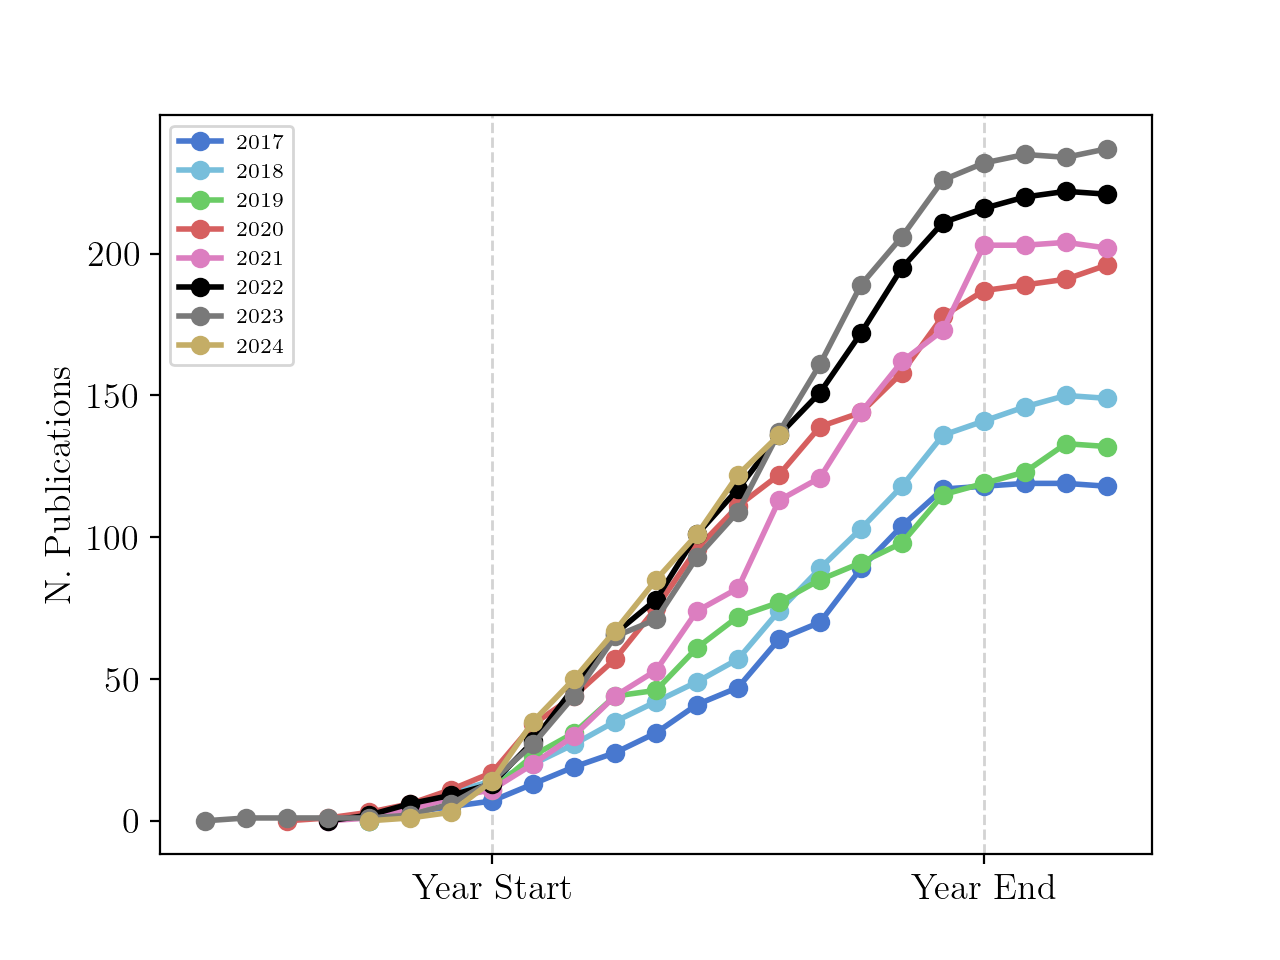 Cumulative publications by month for select years